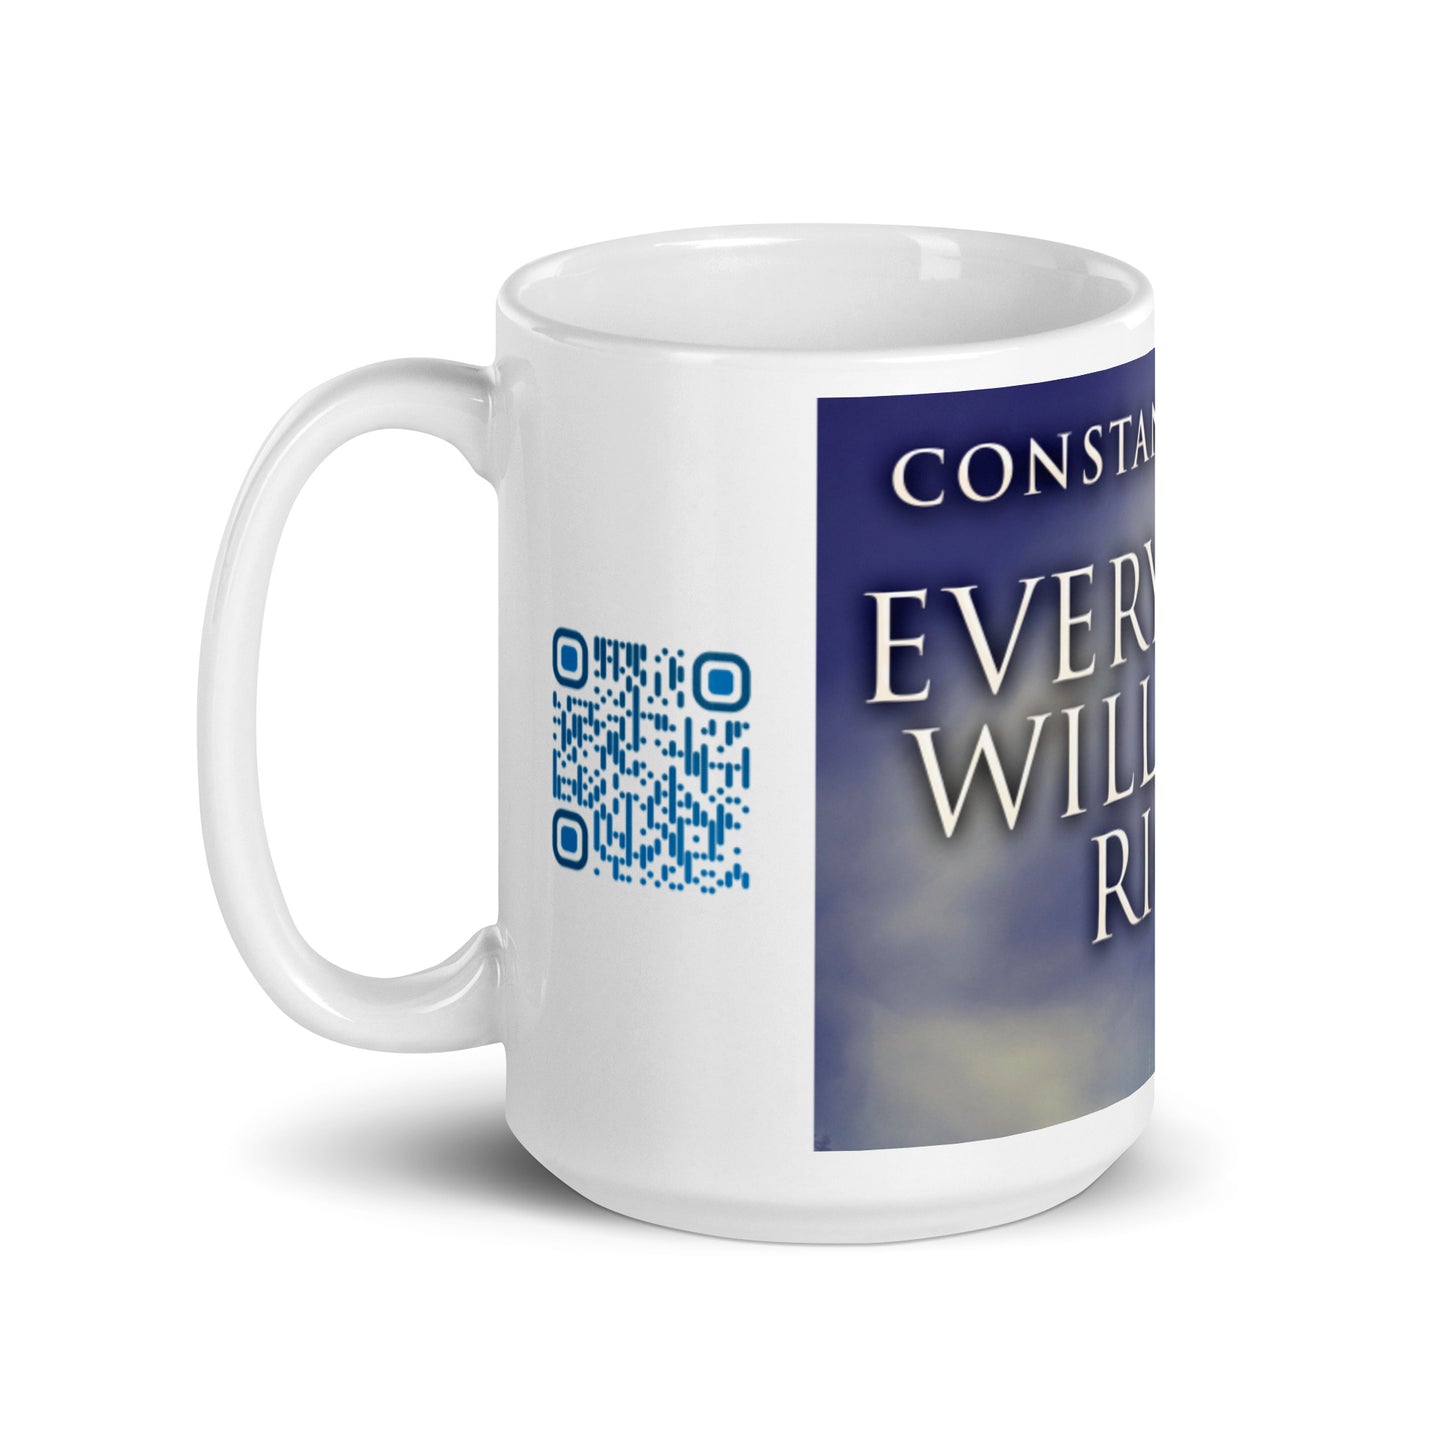 Everything Will Be All Right - White Coffee Mug